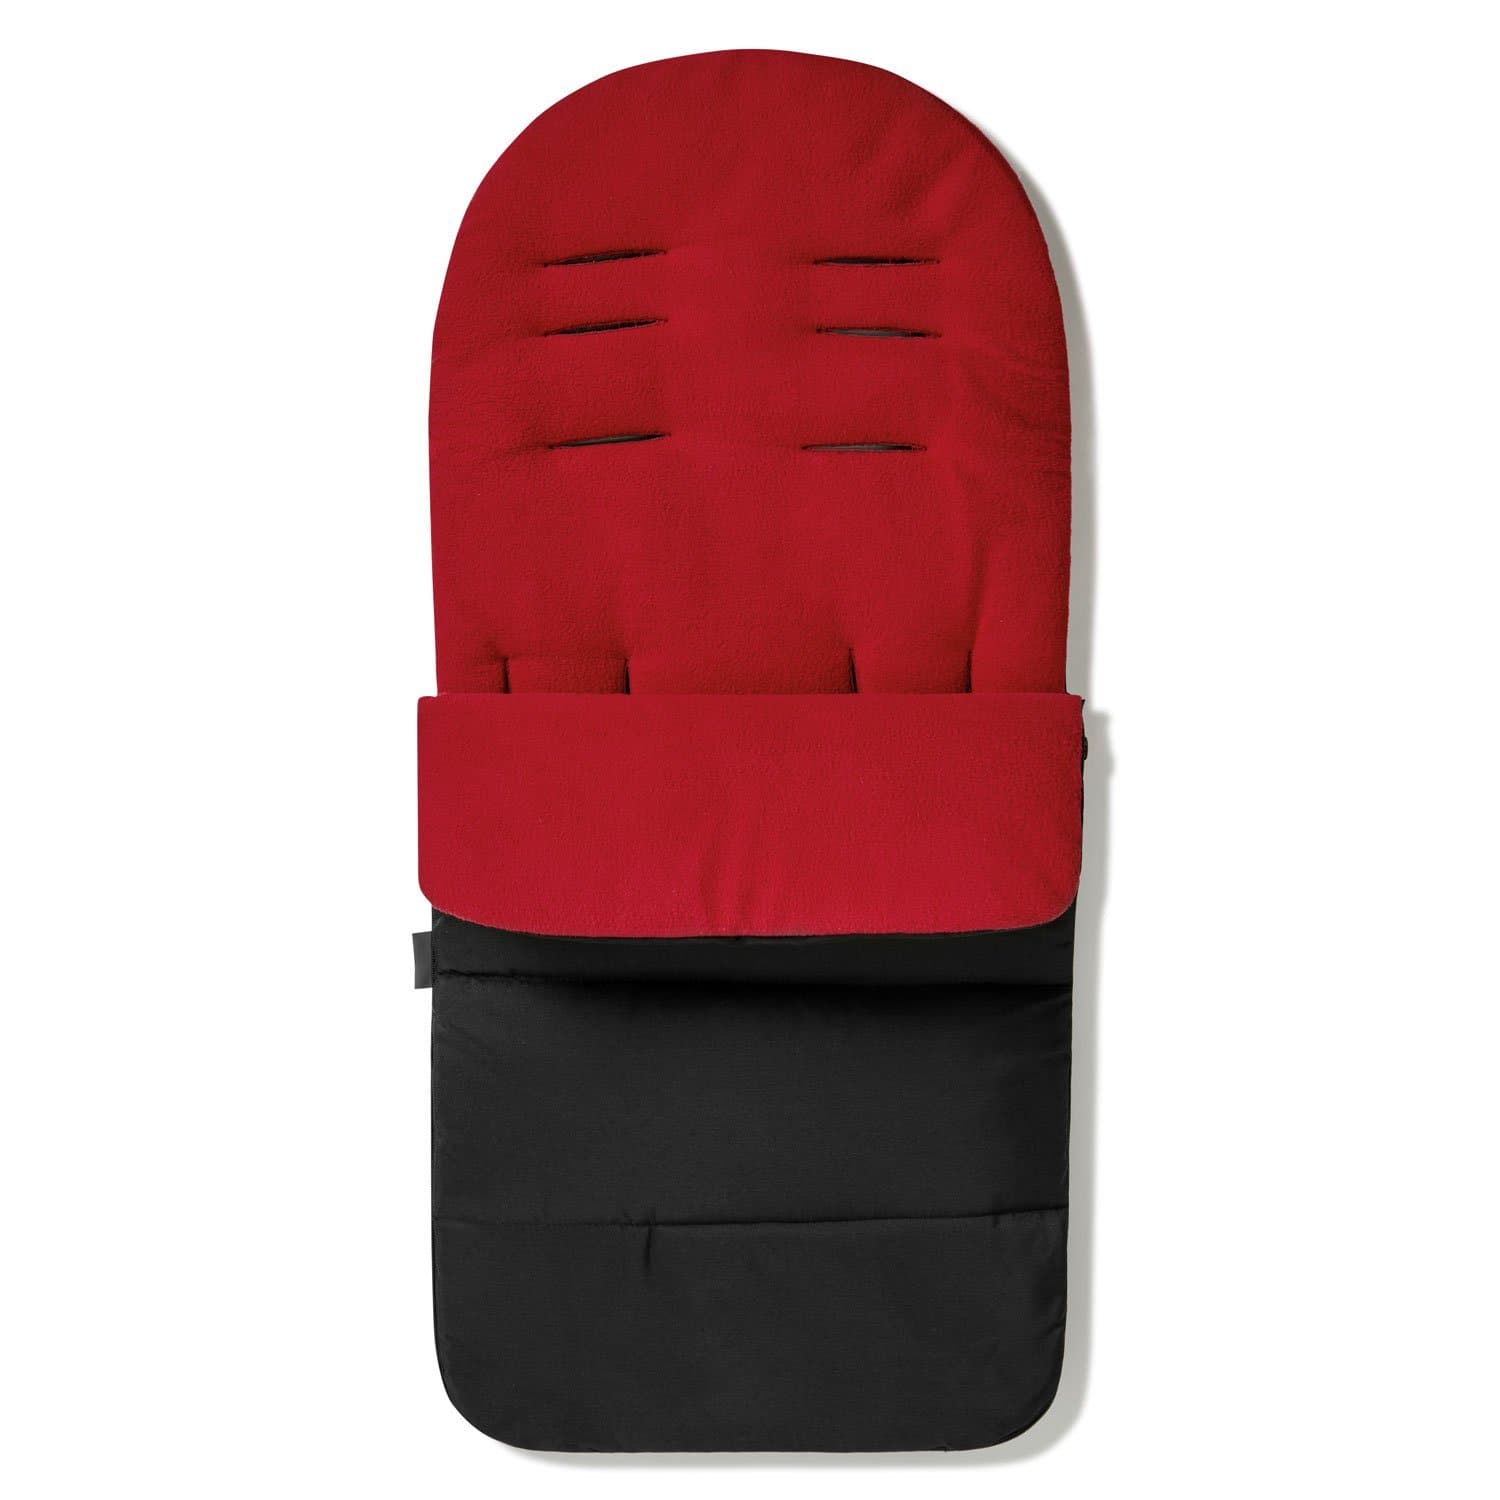 Premium Footmuff / Cosy Toes Compatible with Kiddicouture - Fire Red / Fits All Models | For Your Little One